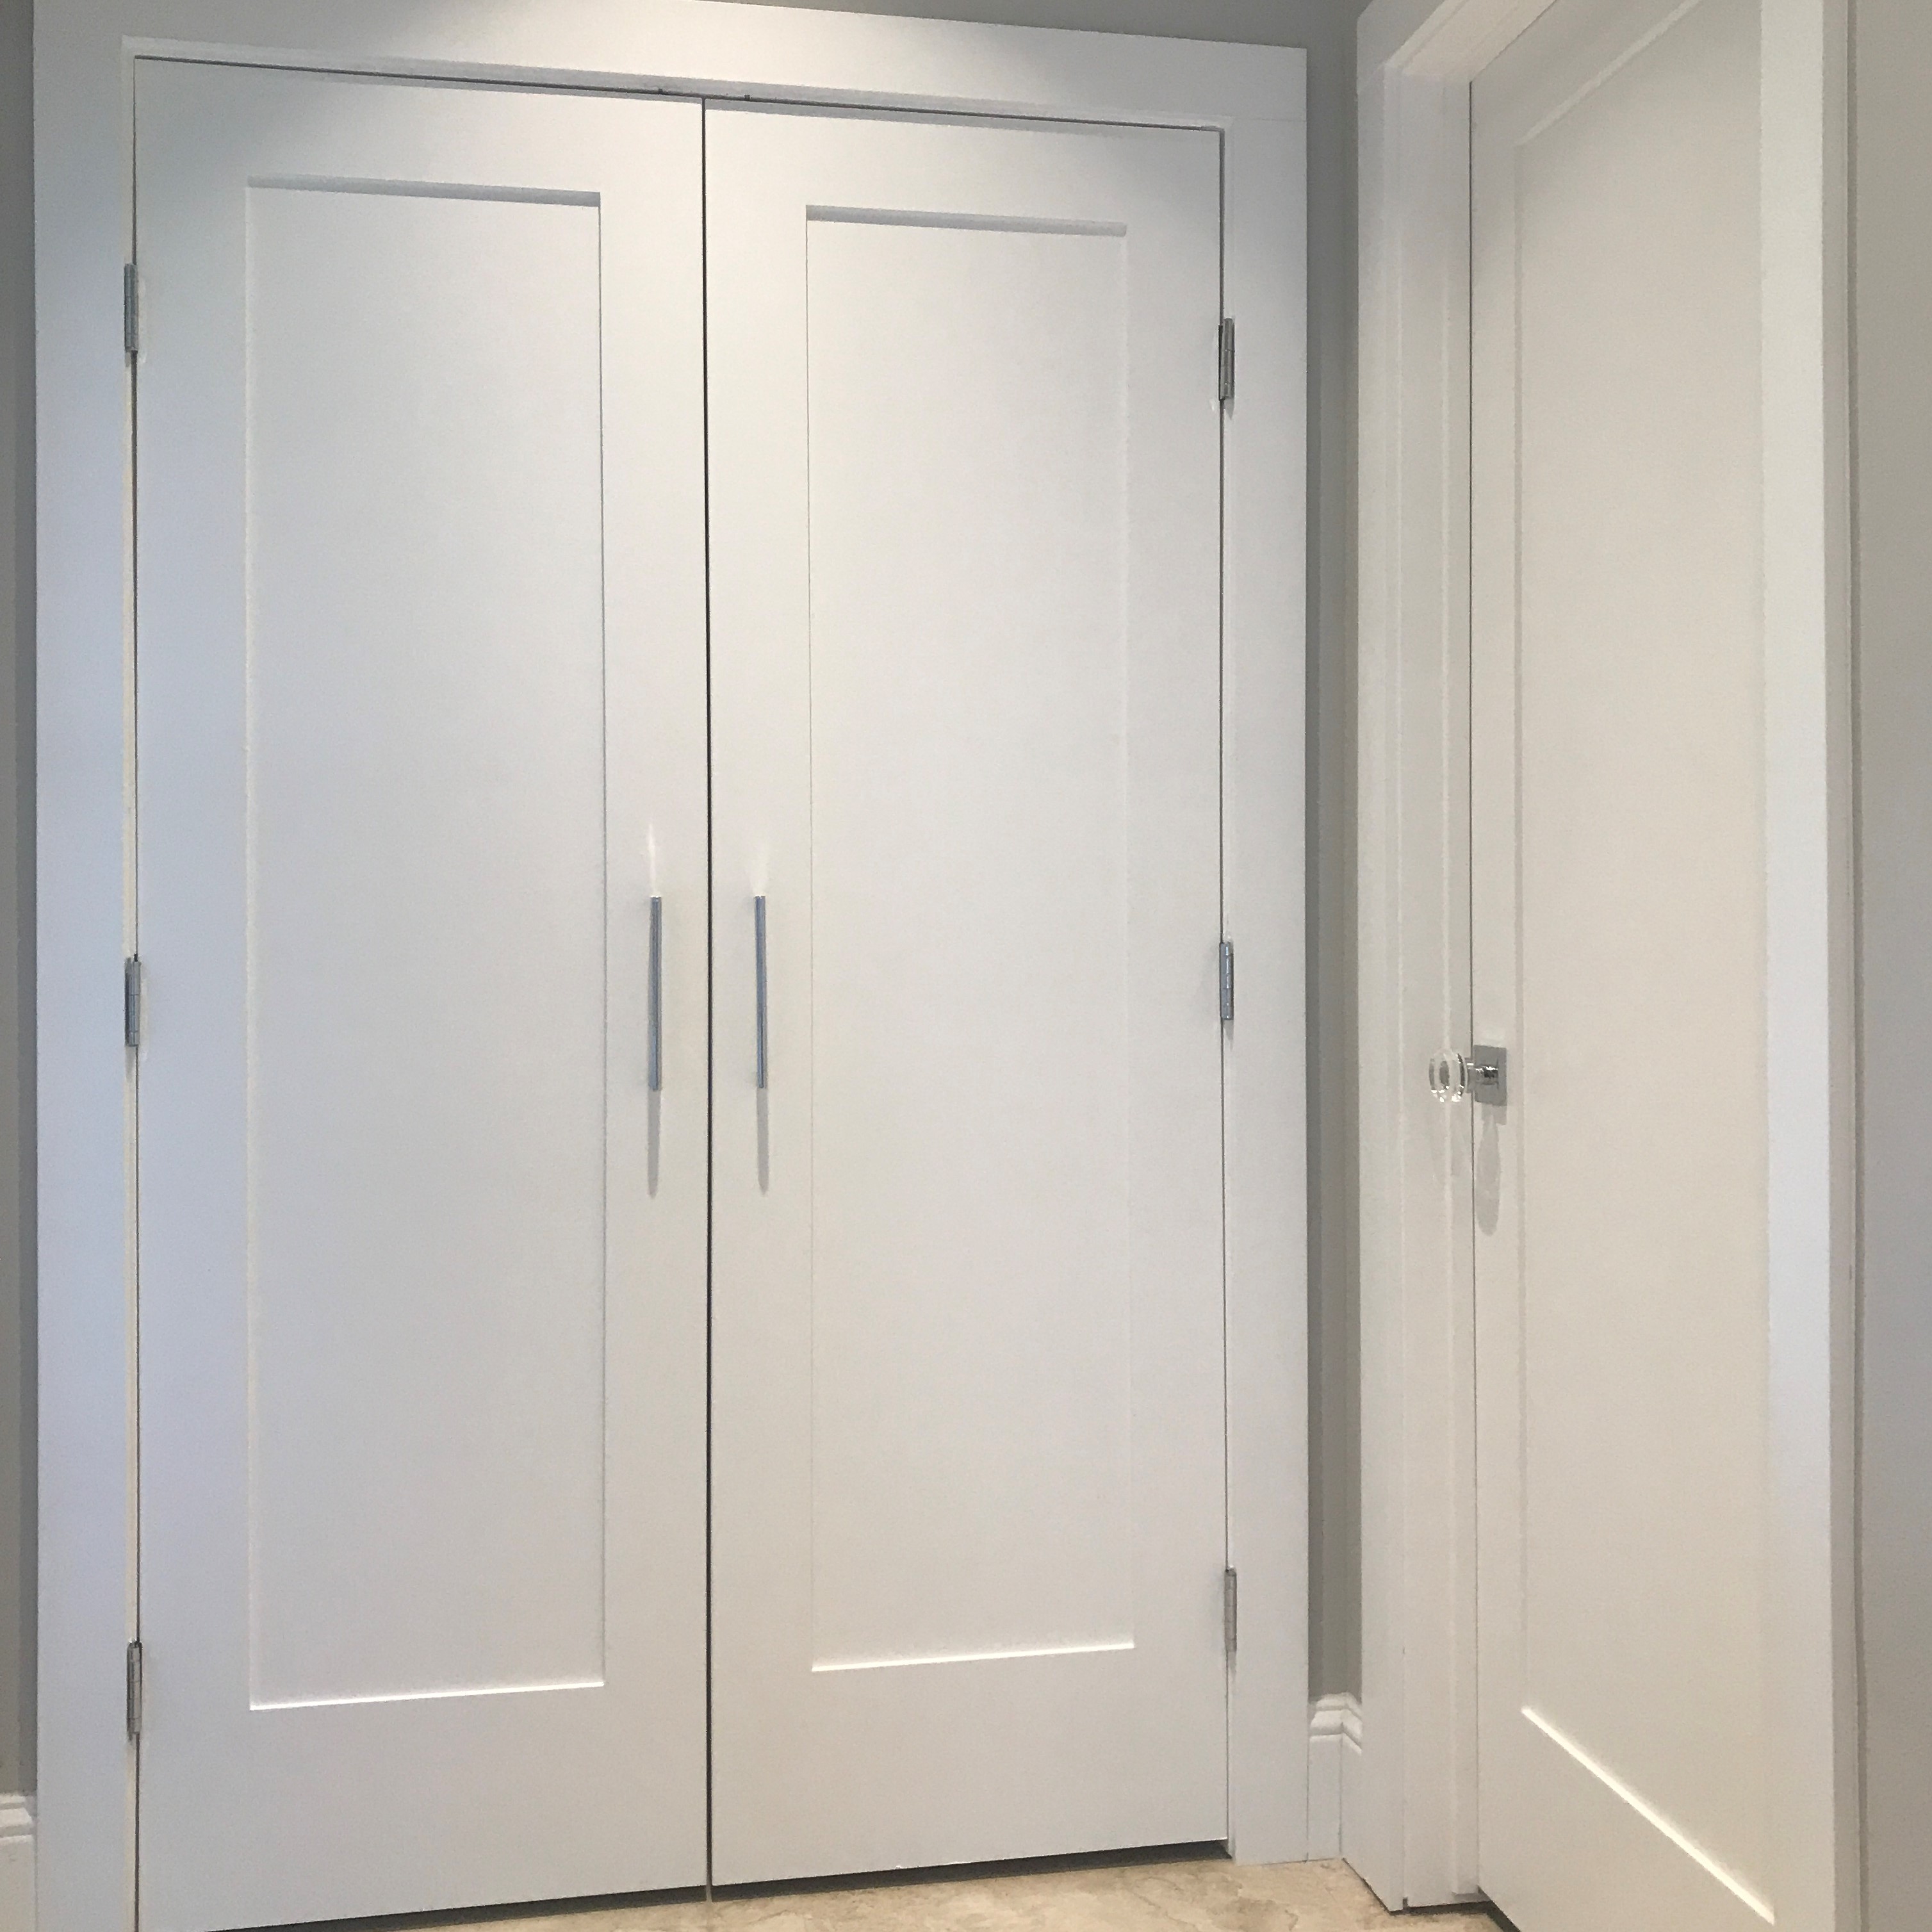 6 Examples Of Beautiful Interior Doors For Your Dallas Home